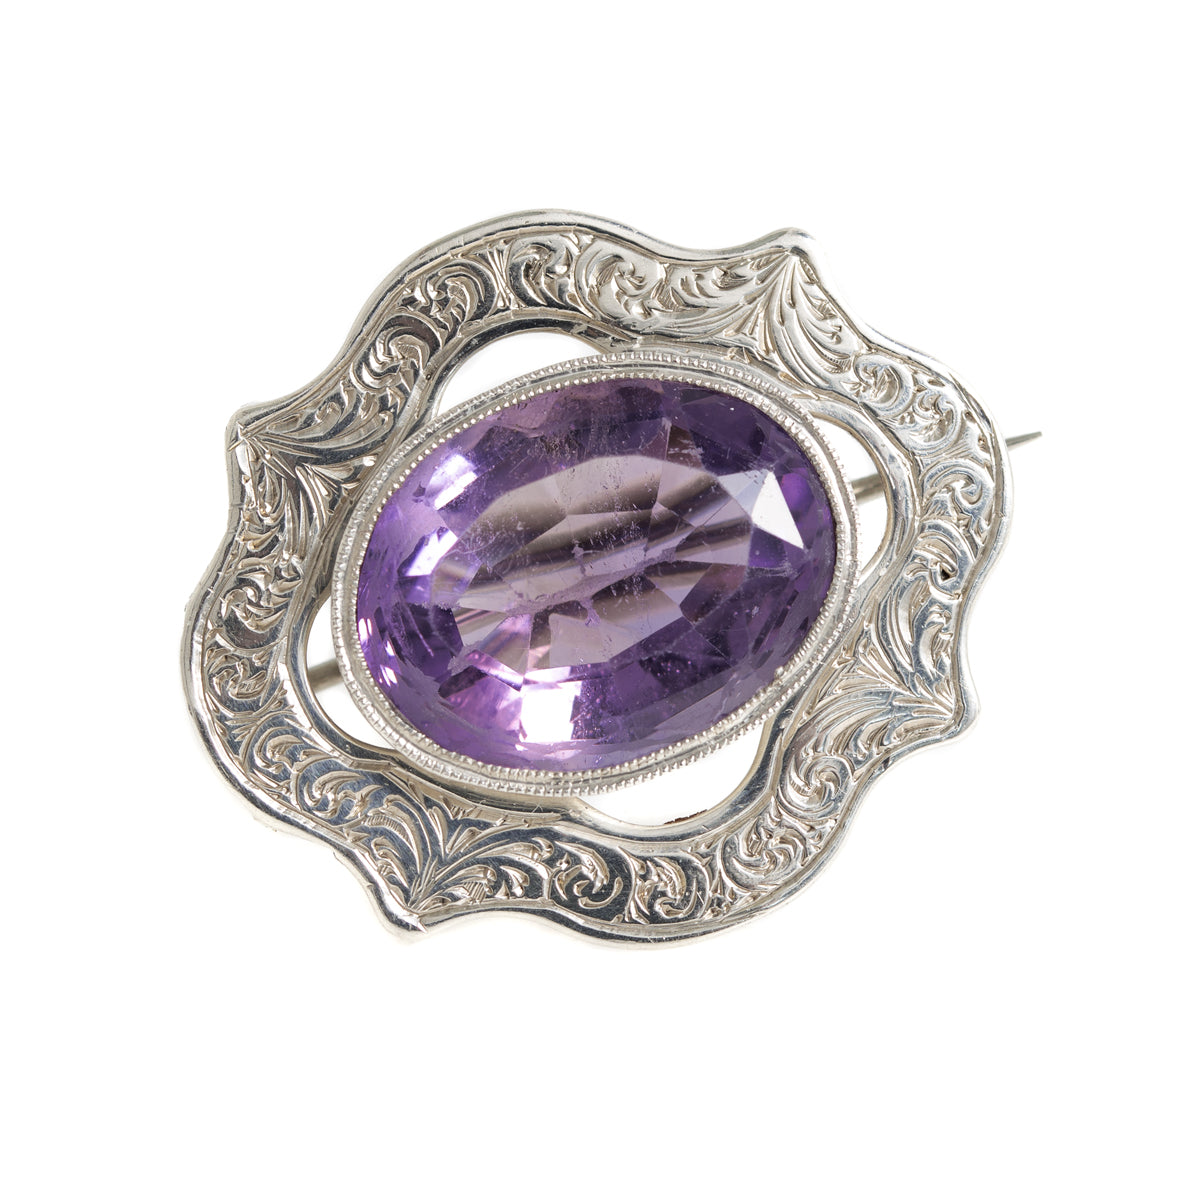 Antique Victorian Chased Silver & Large Natural Amethyst Brooch / Pin c.1860 (A1193)